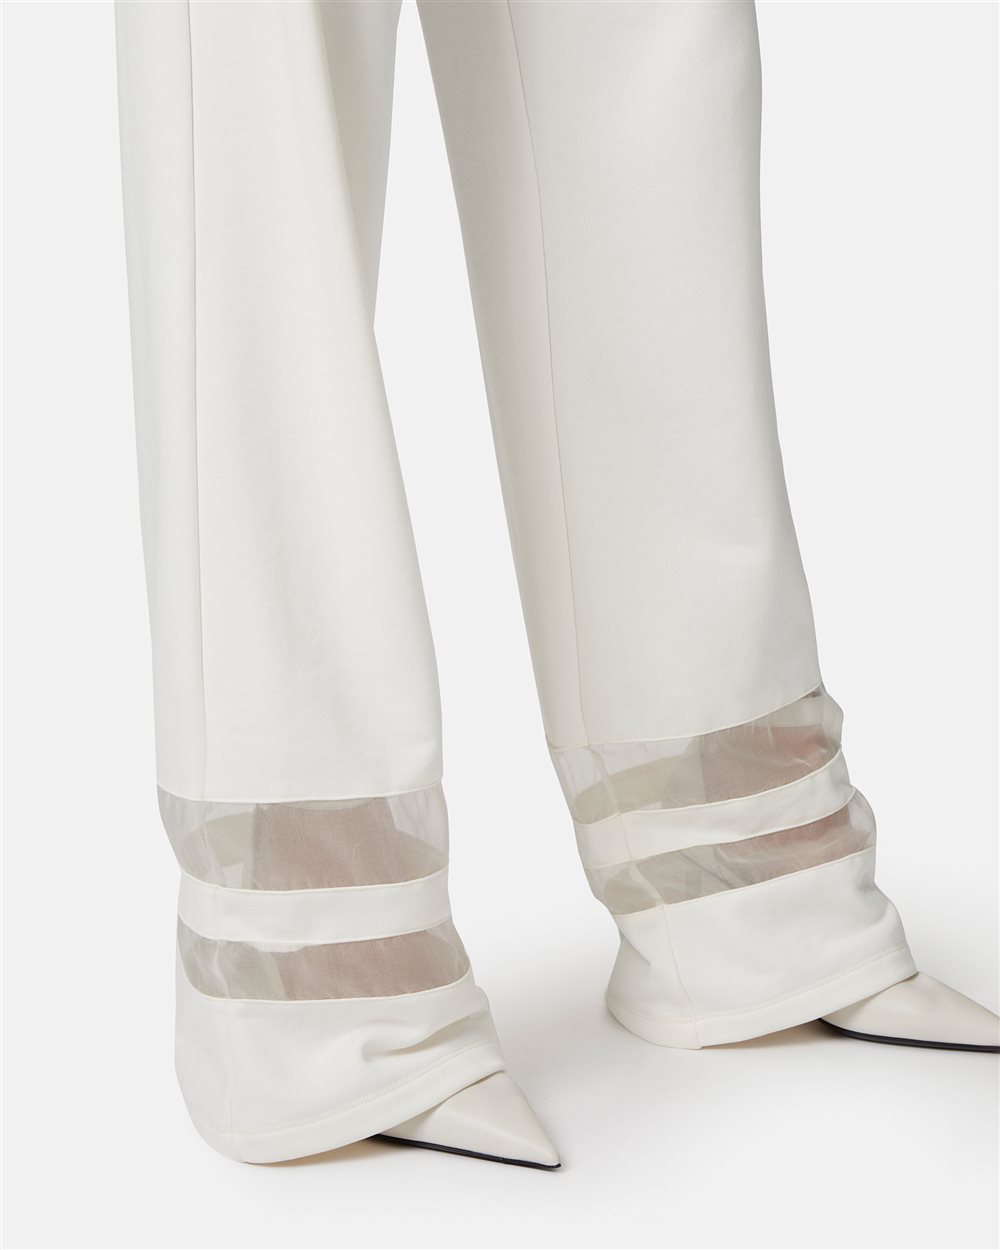 Wide trousers with logo - Iceberg - Official Website